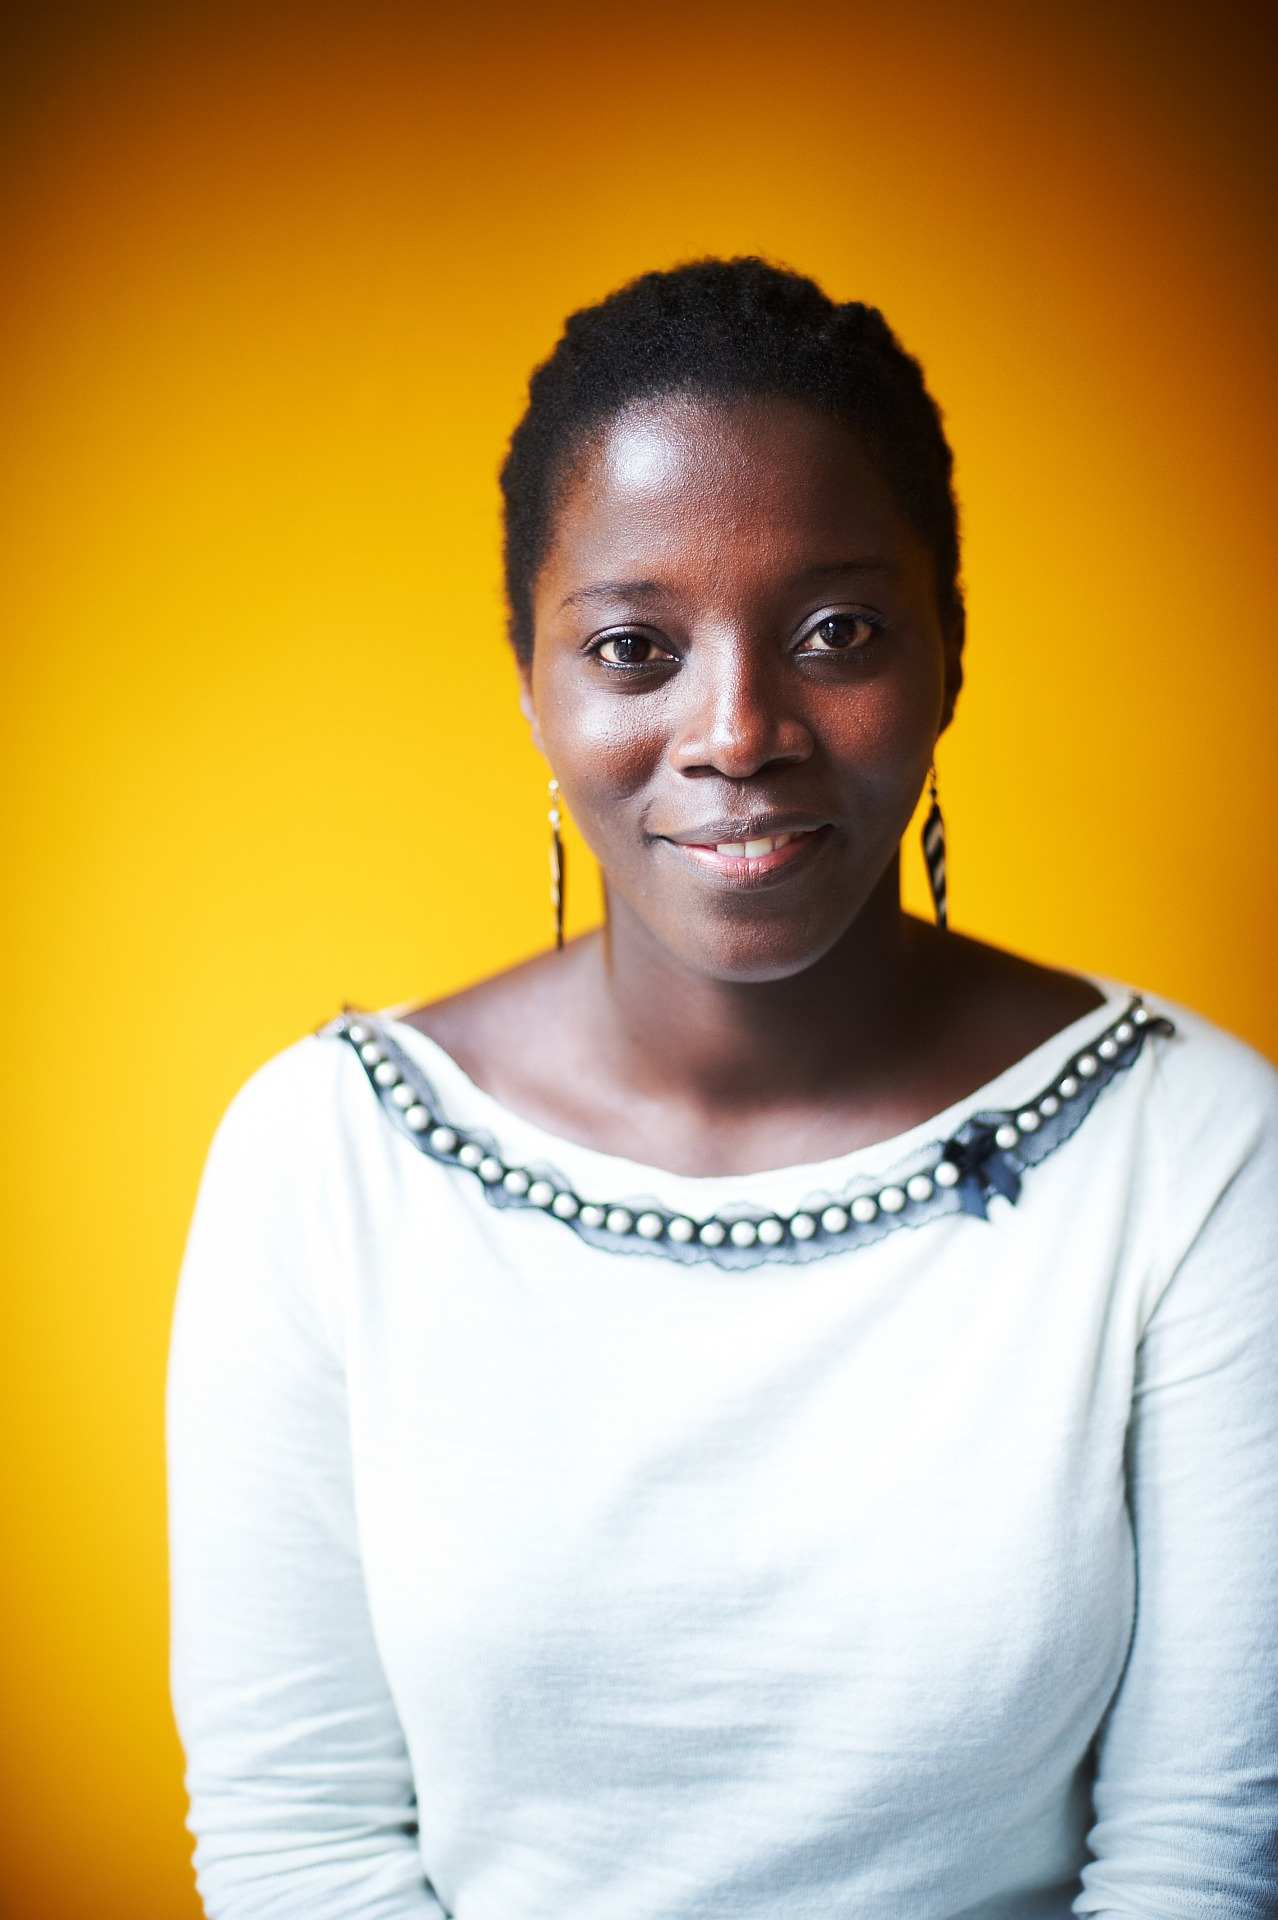 Opportunity Desk June Young Person of the Month: Diane Mbarushimana from Belgium